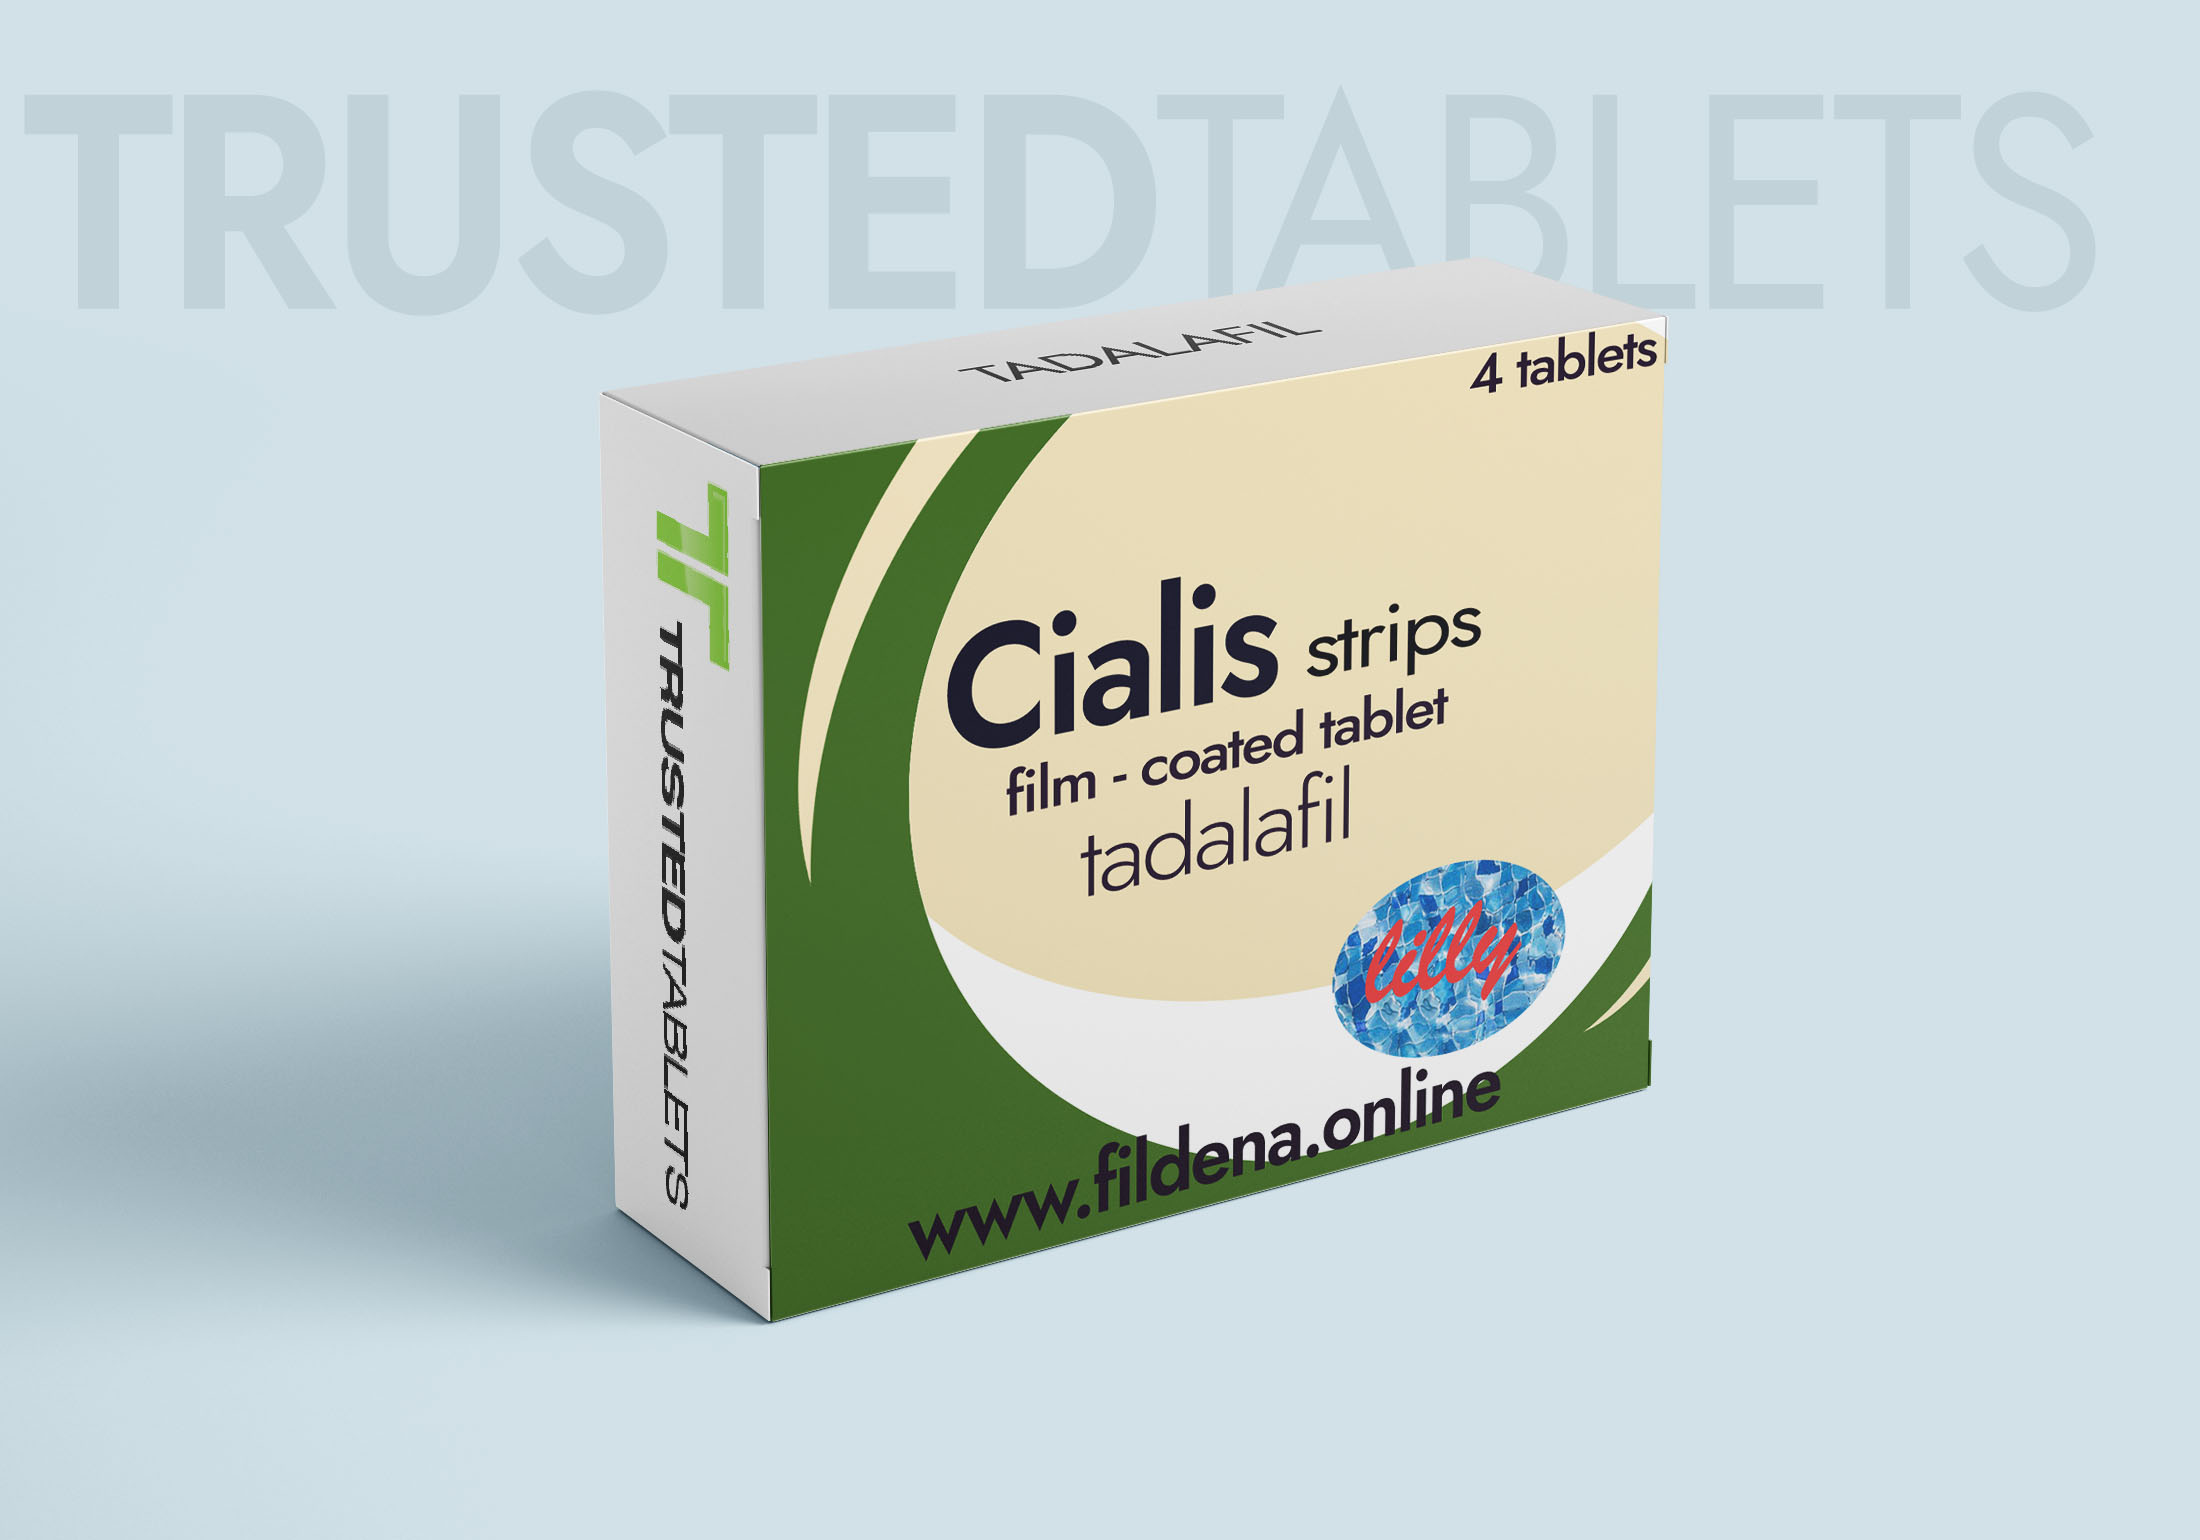 Cialis Strips TrustedTablets